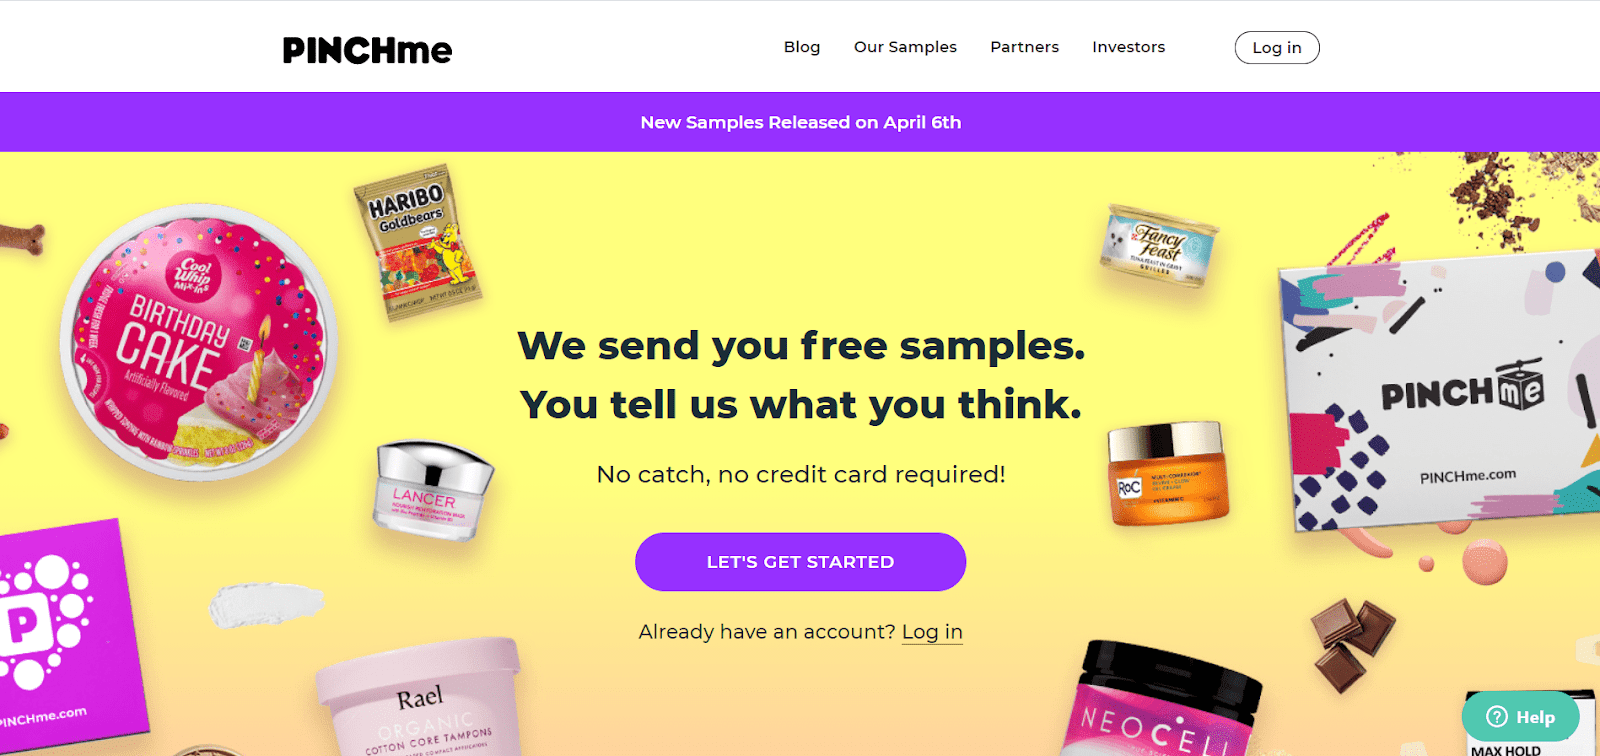 Pinchme sends you free samples to try in exchange for your opinion.